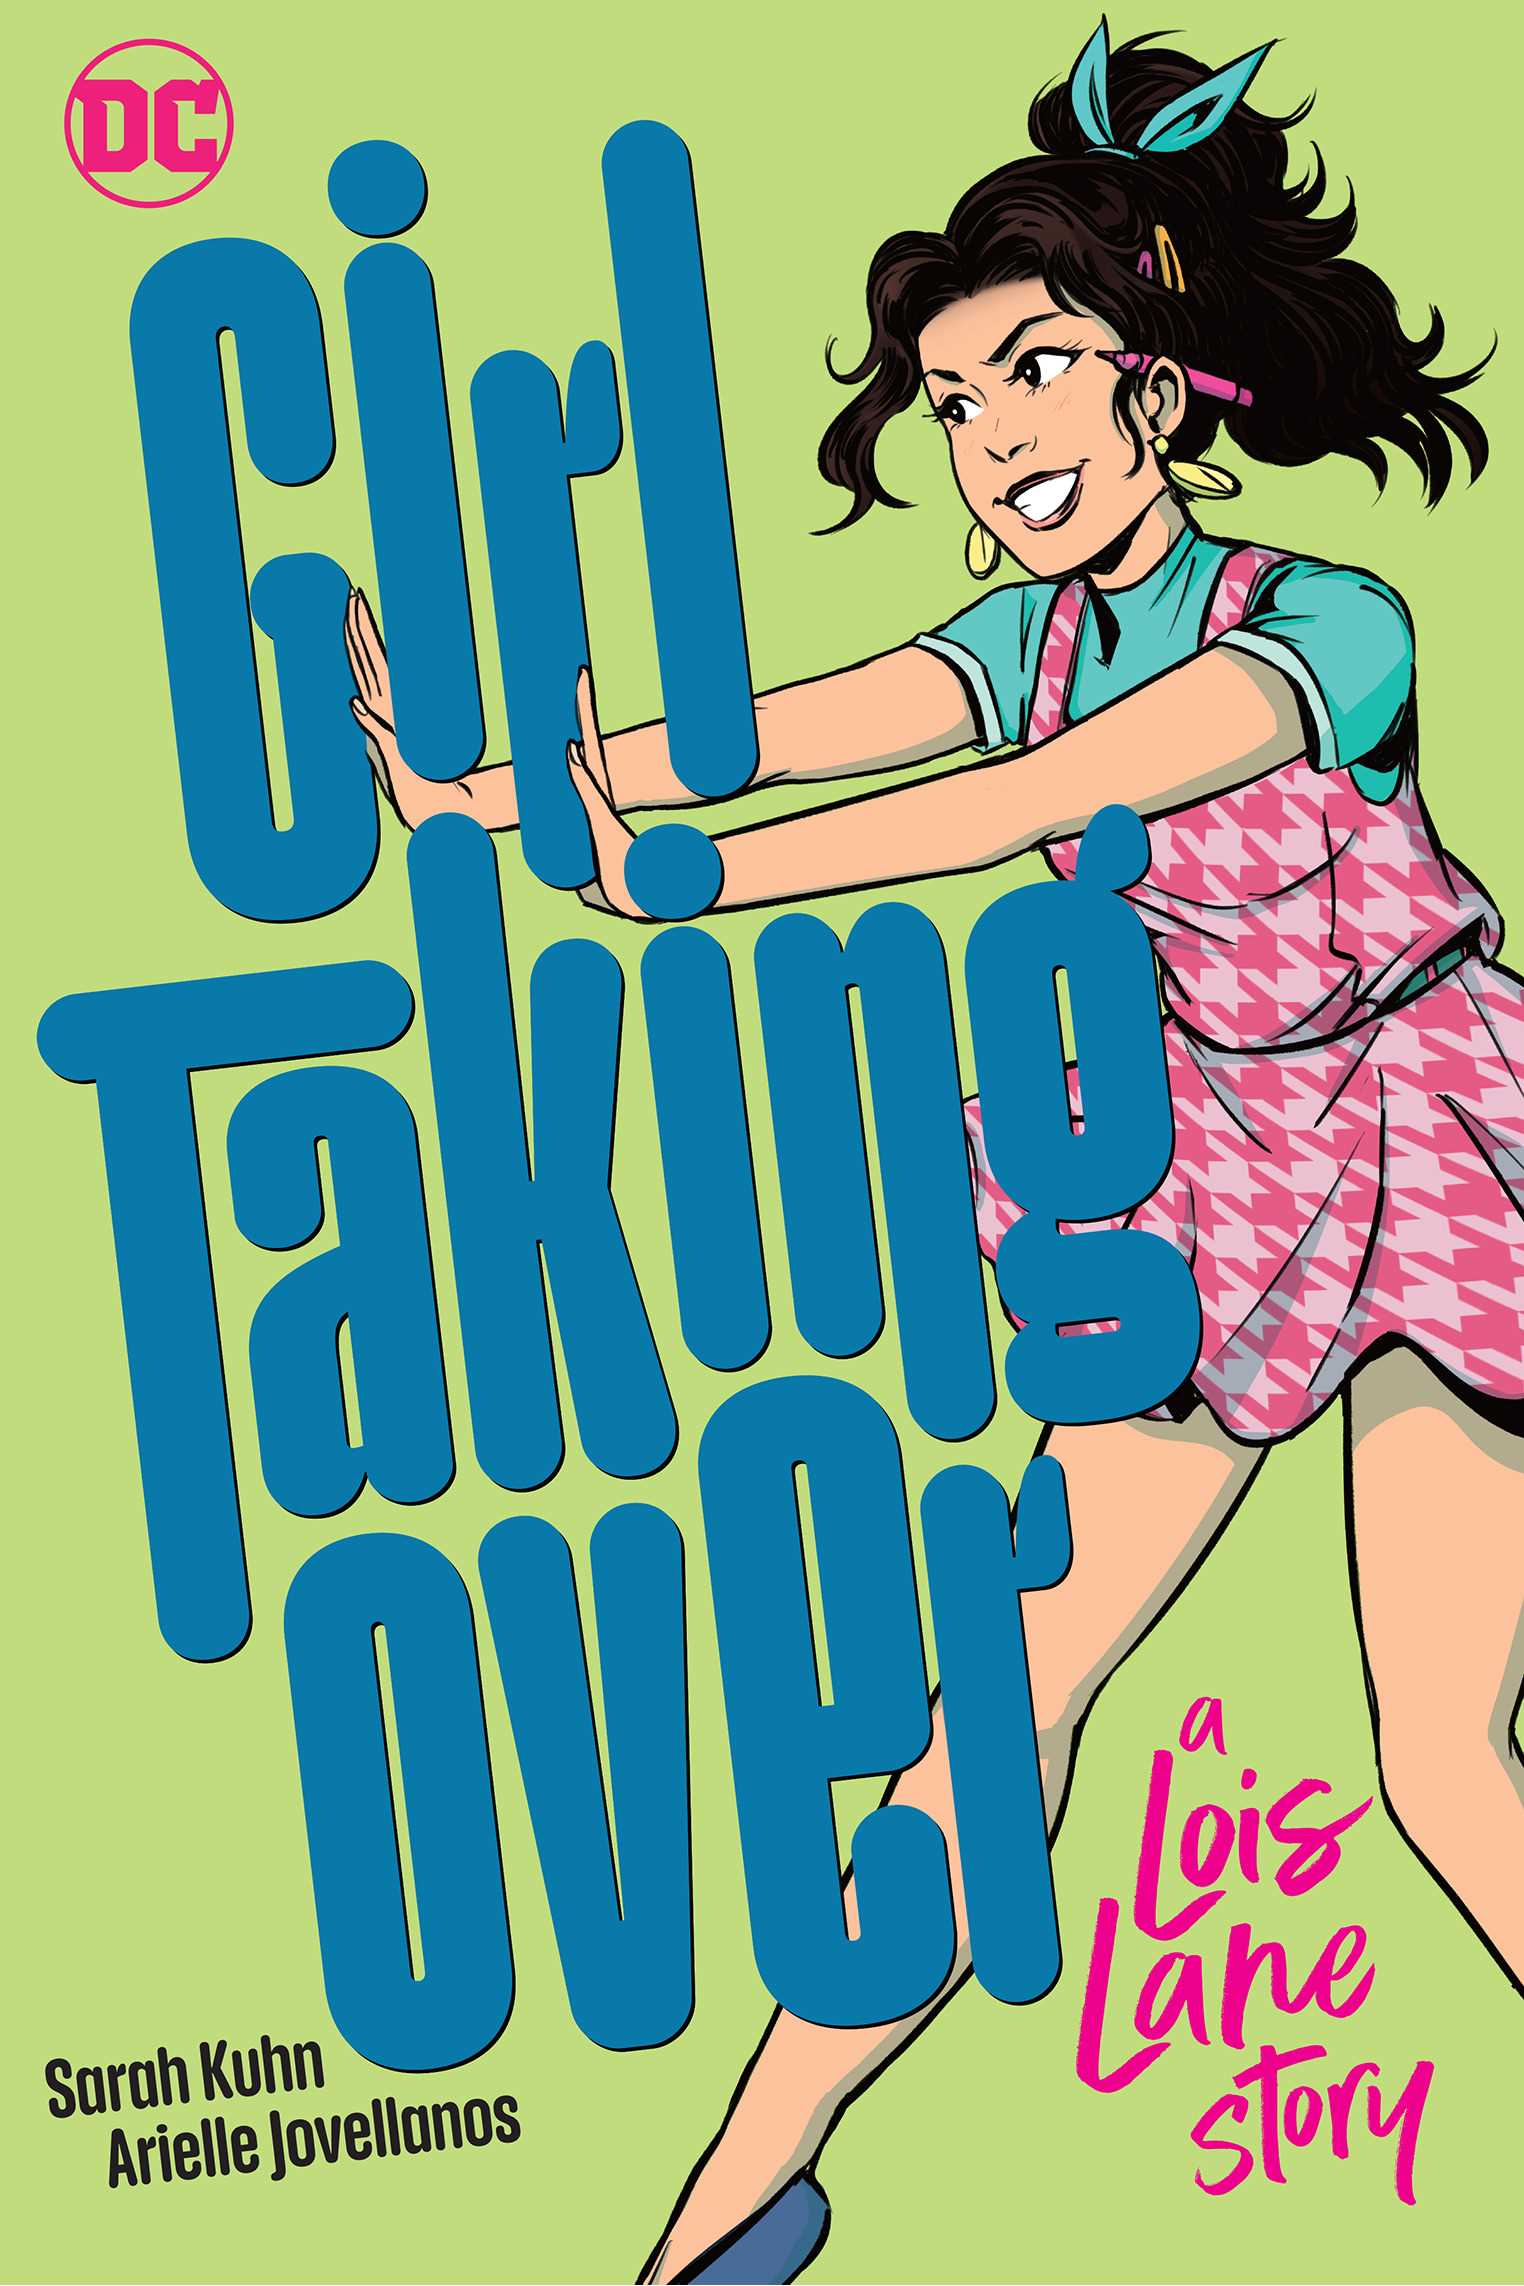 Girl Taking Over (A Louis Lane Story)